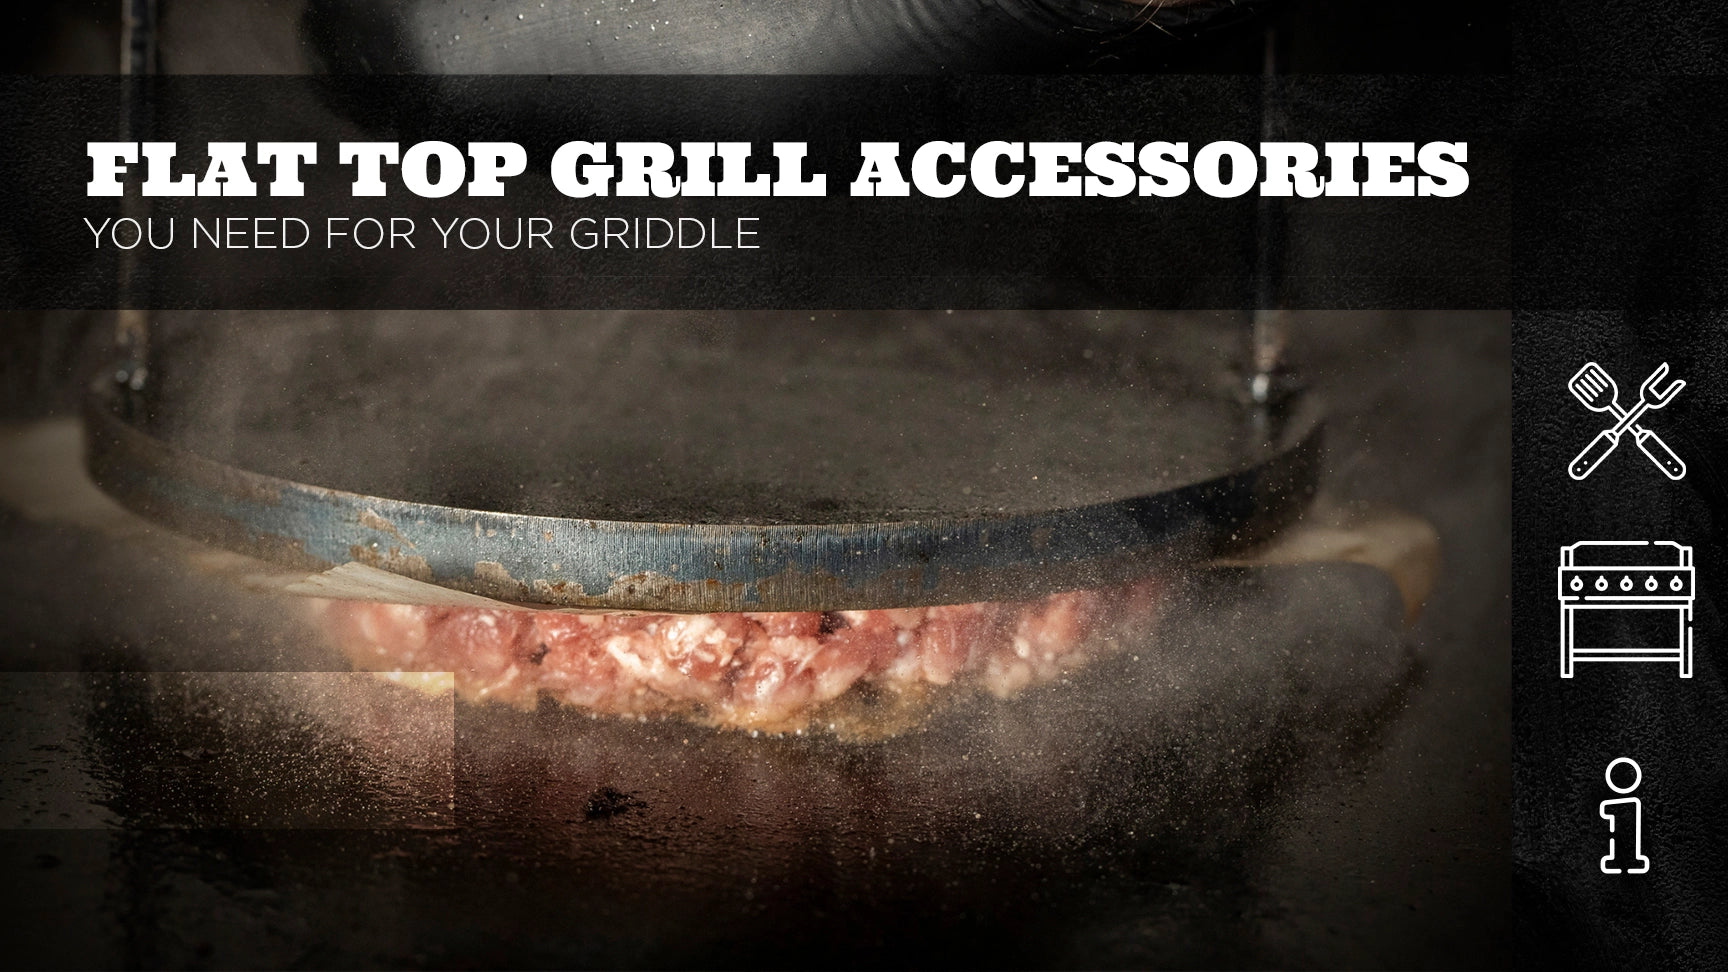 5 things I wish I knew before replacing my grill with a flat-top